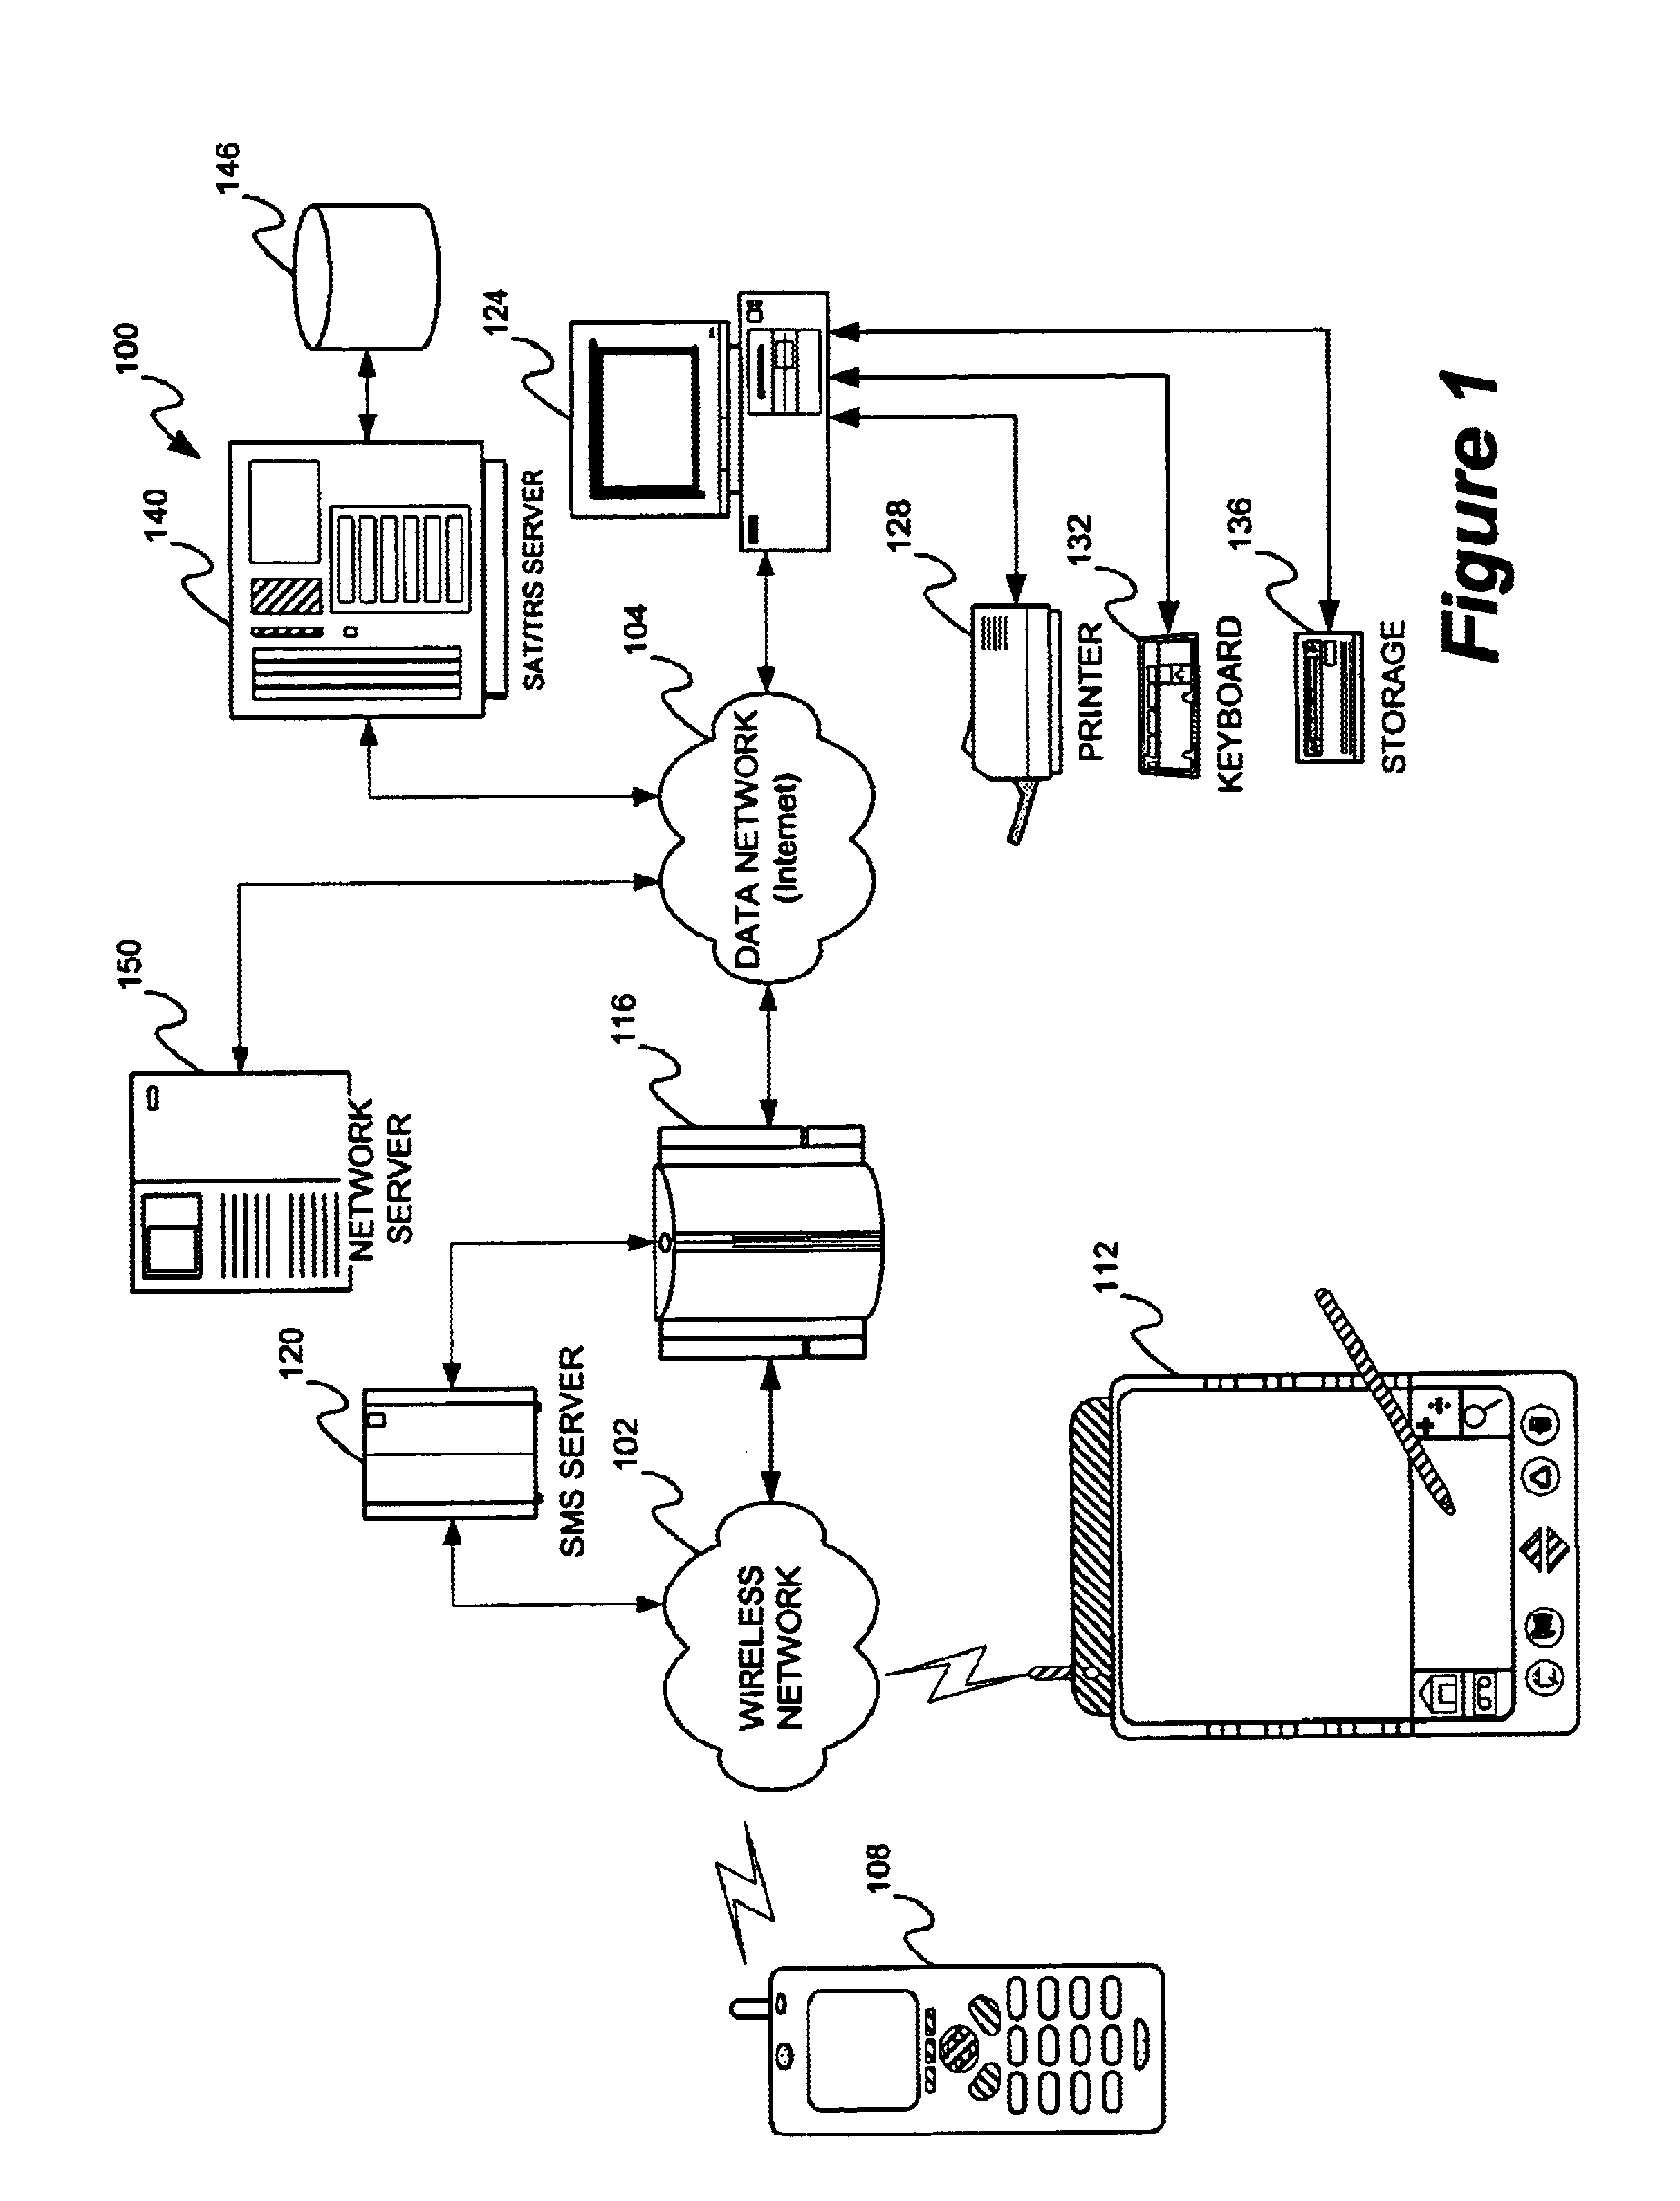 Method and system for activating and capturing screen displays associated with predetermined user interface events